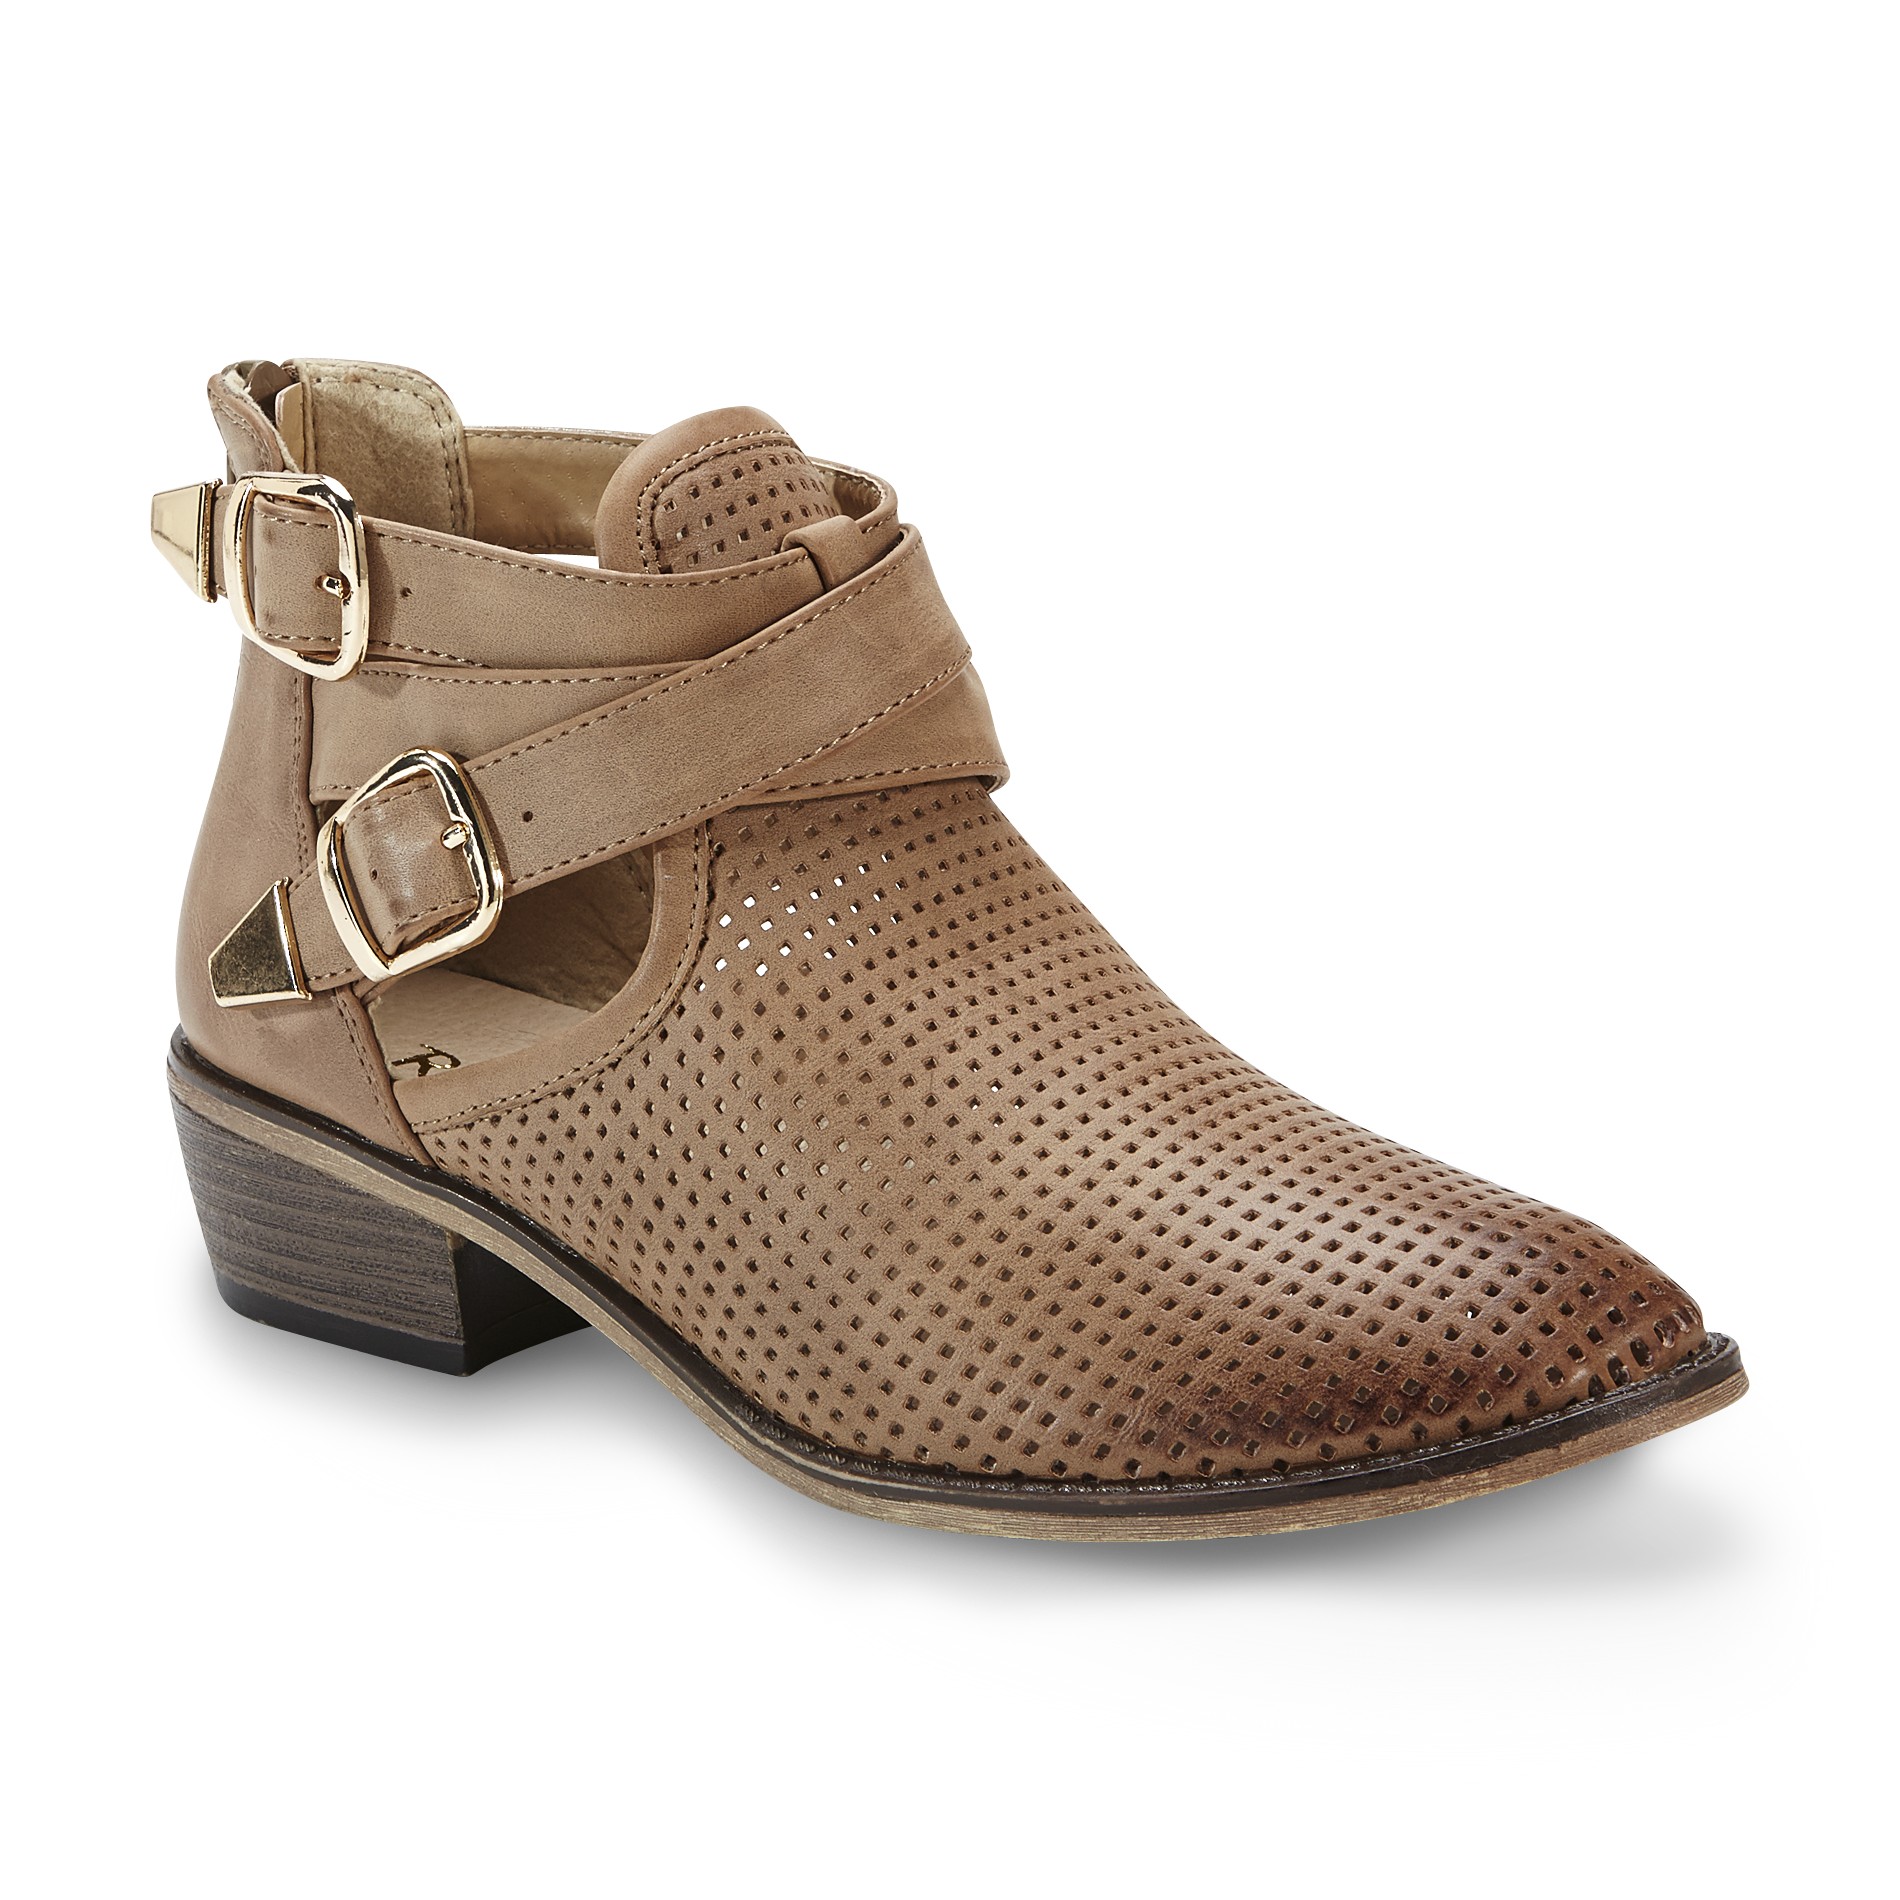 Restricted Women's North Tan Perforated Bootie